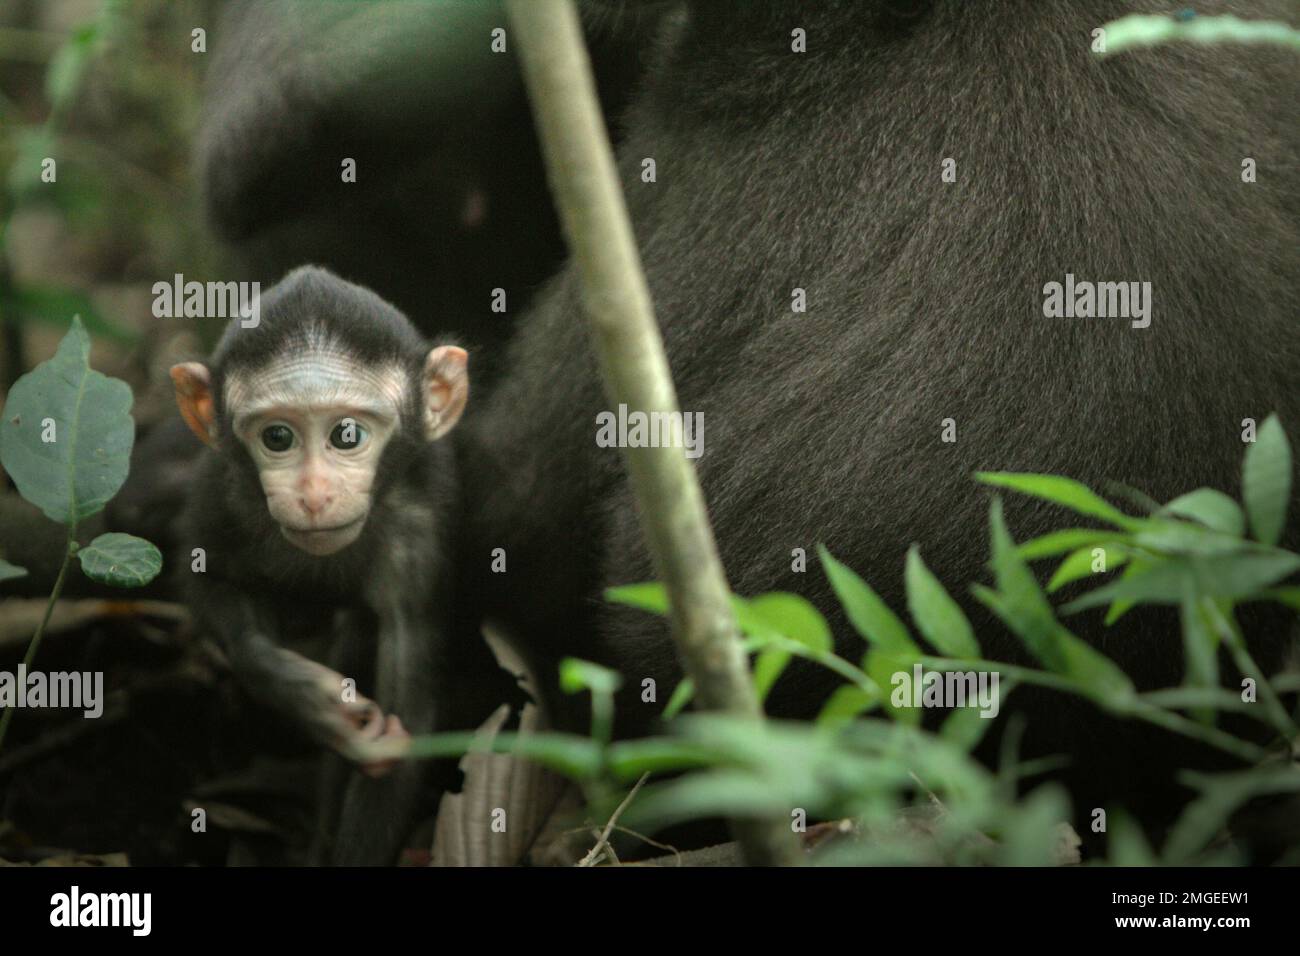 A curious infant of Sulawesi black-crested macaque (Macaca nigra) is moving away from its mother during weaning period in their natural habitat, lowland rainforest in Tangkoko Nature Reserve, North Sulawesi, Indonesia. Weaning period of a crested macaque infant—from 5 months of age until 1-year of age—is the earliest phase of life where infant mortality is the highest. Primate scientists from Macaca Nigra Project observed that '17 of the 78 infants (22%) disappeared in their first year of life. Eight of these 17 infants' dead bodies were found with large puncture wounds.' Stock Photo